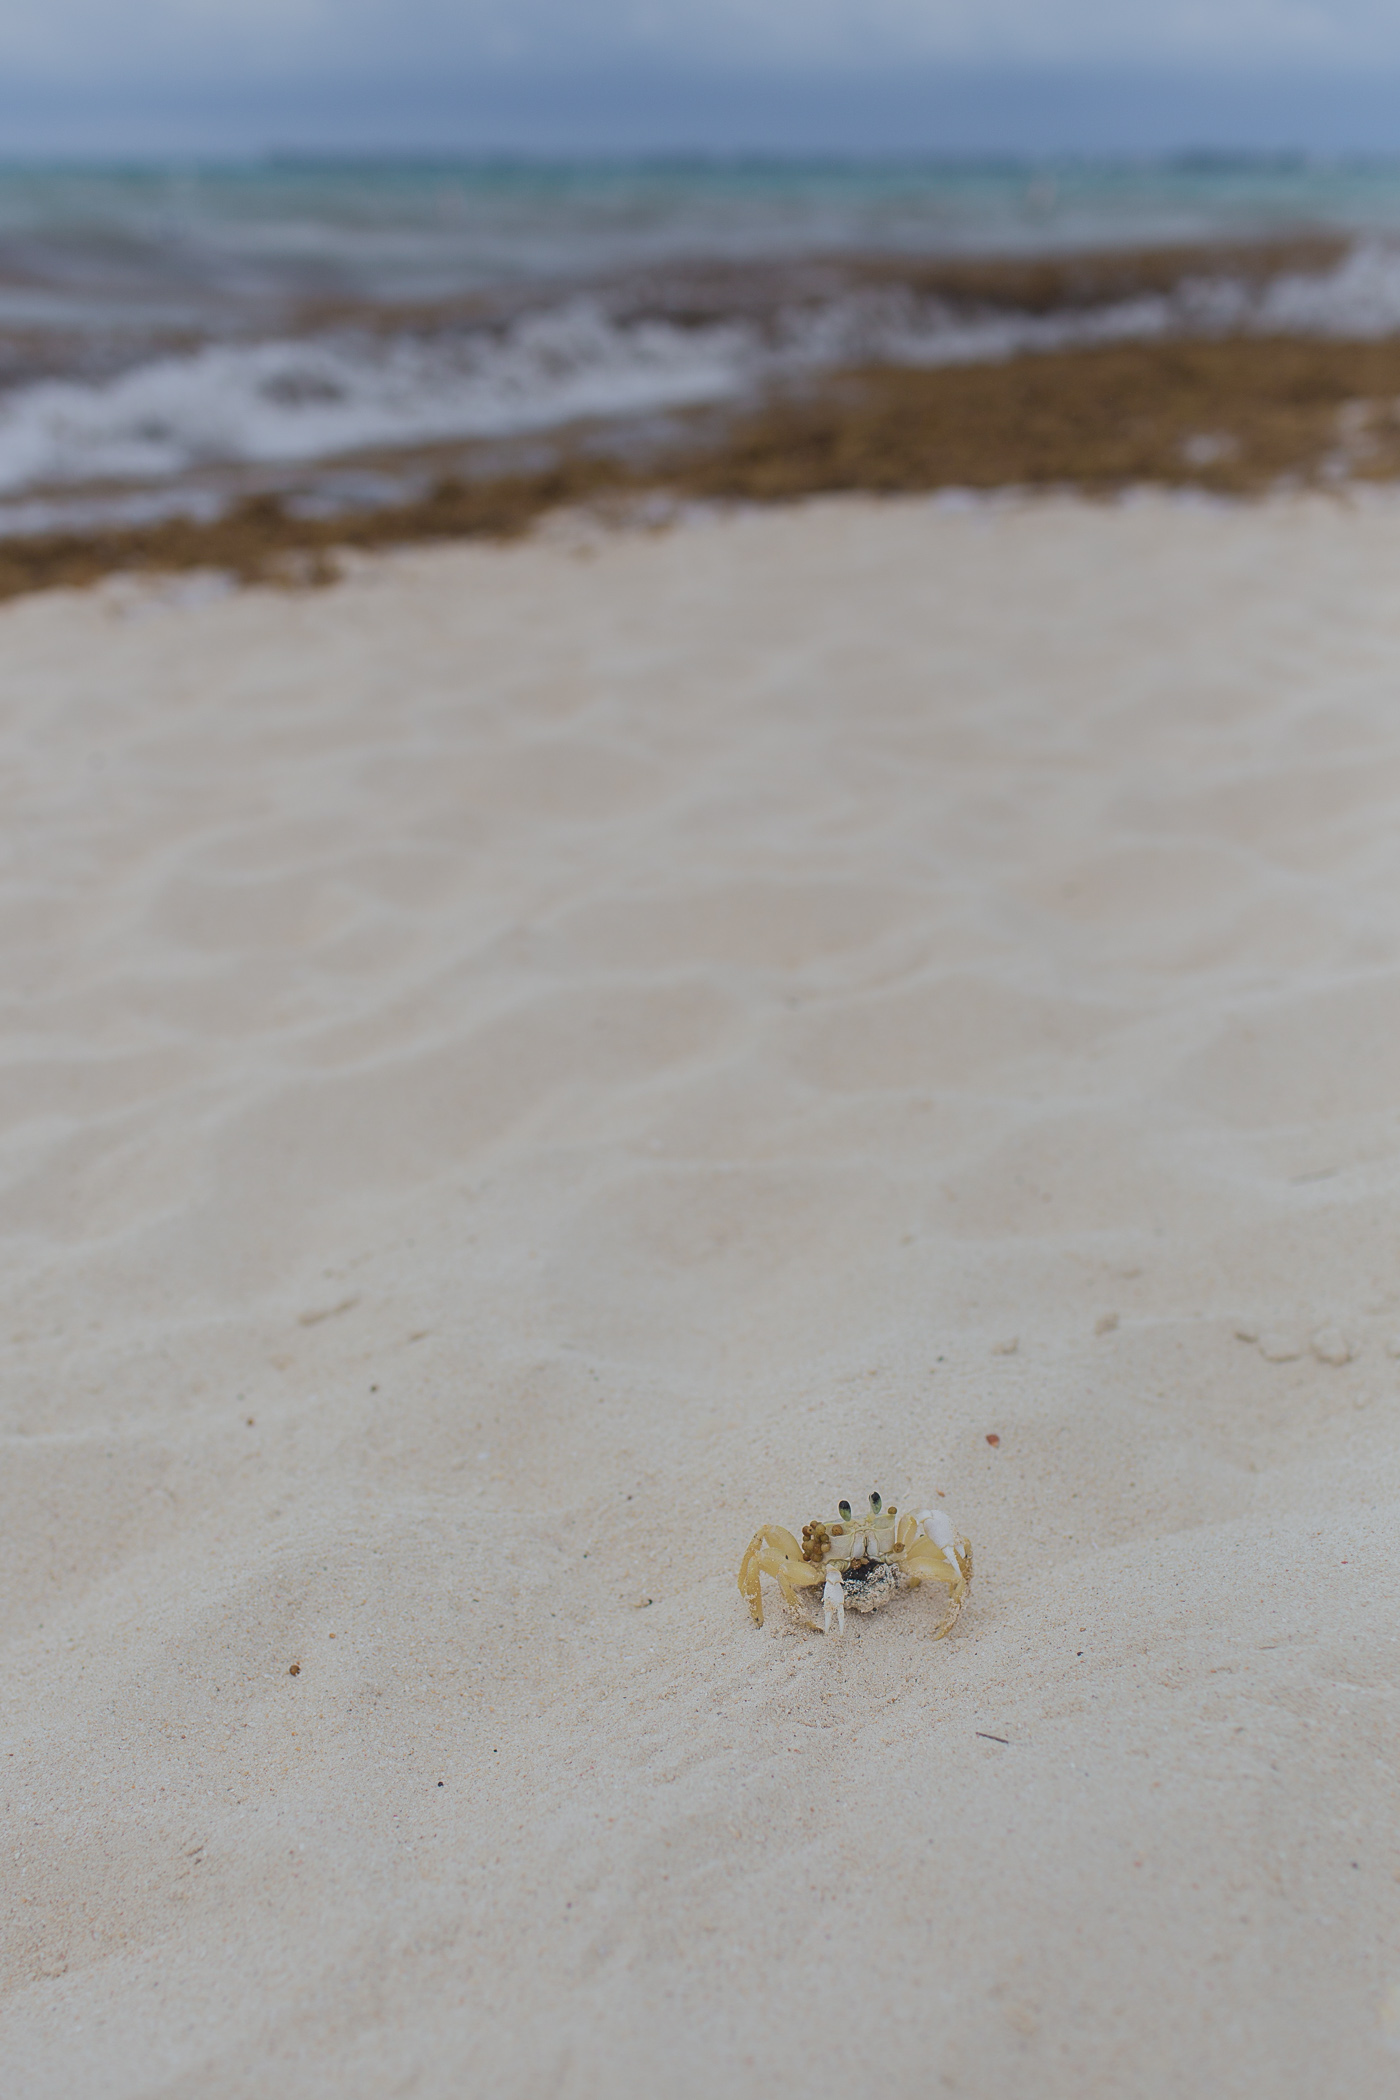 Crab on Seven Mile Beach in Grand Cayman